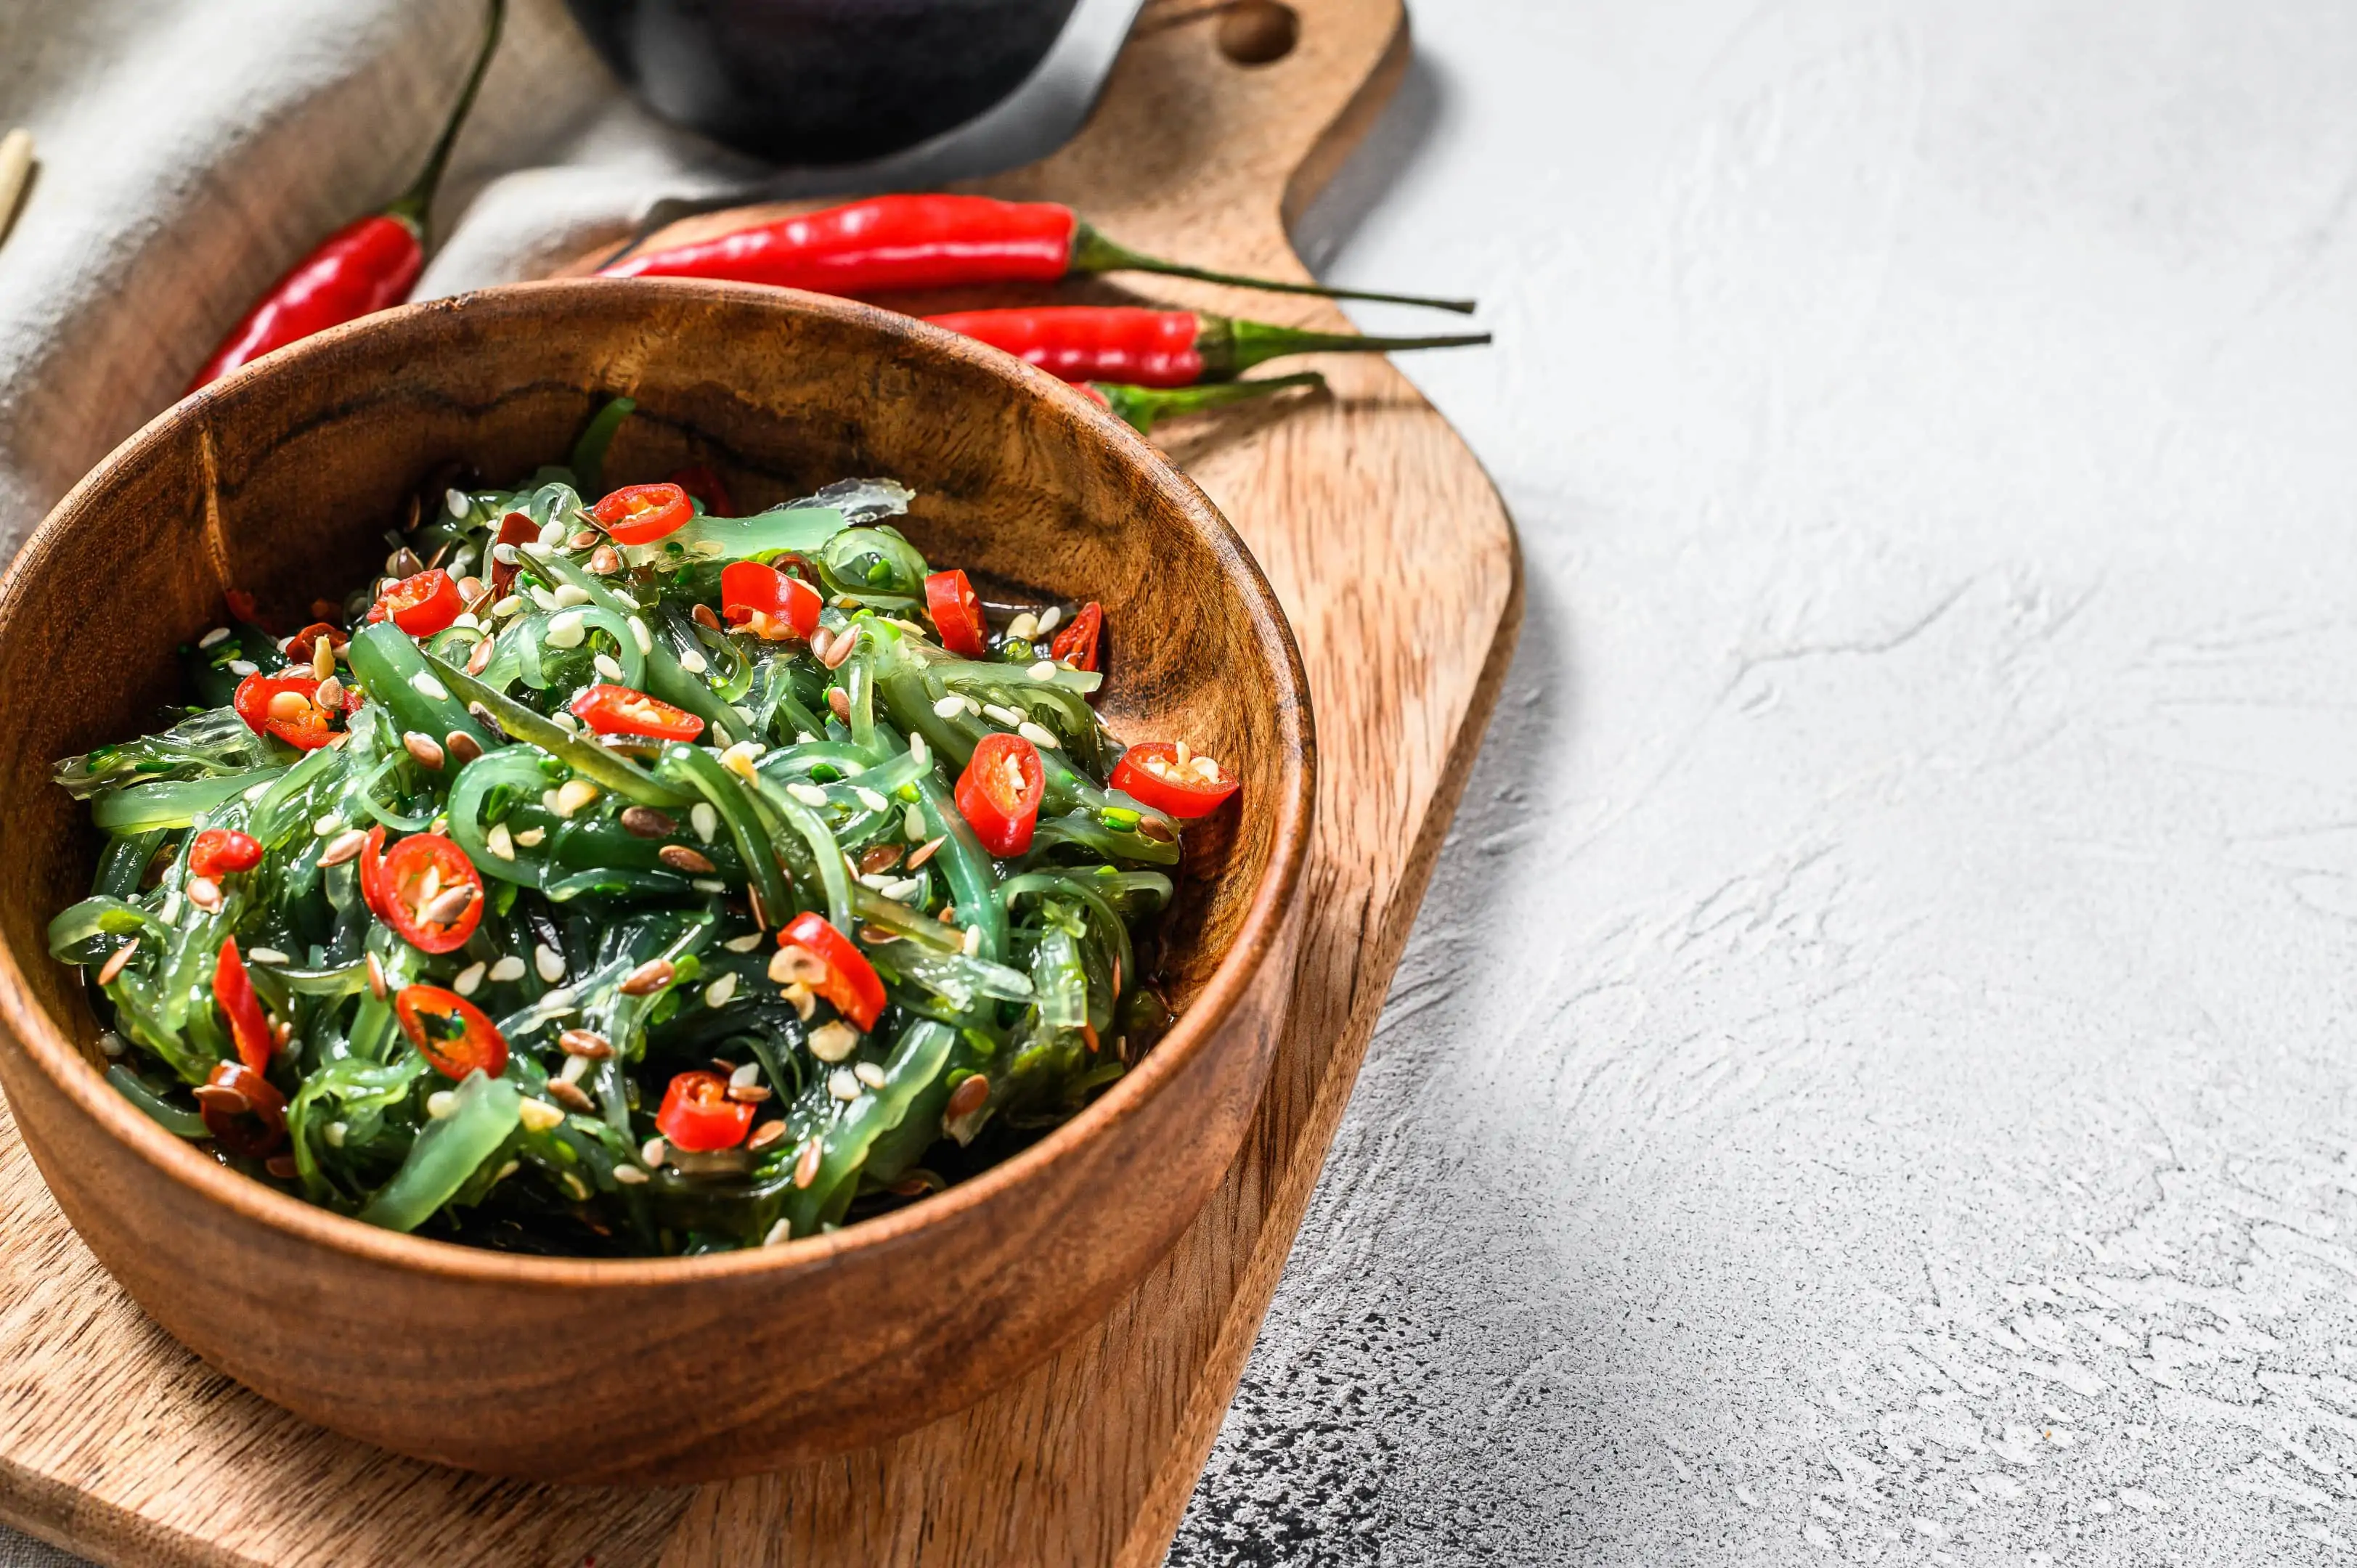 Salad with seaweed wakame and red chili pepper in wooden bowl